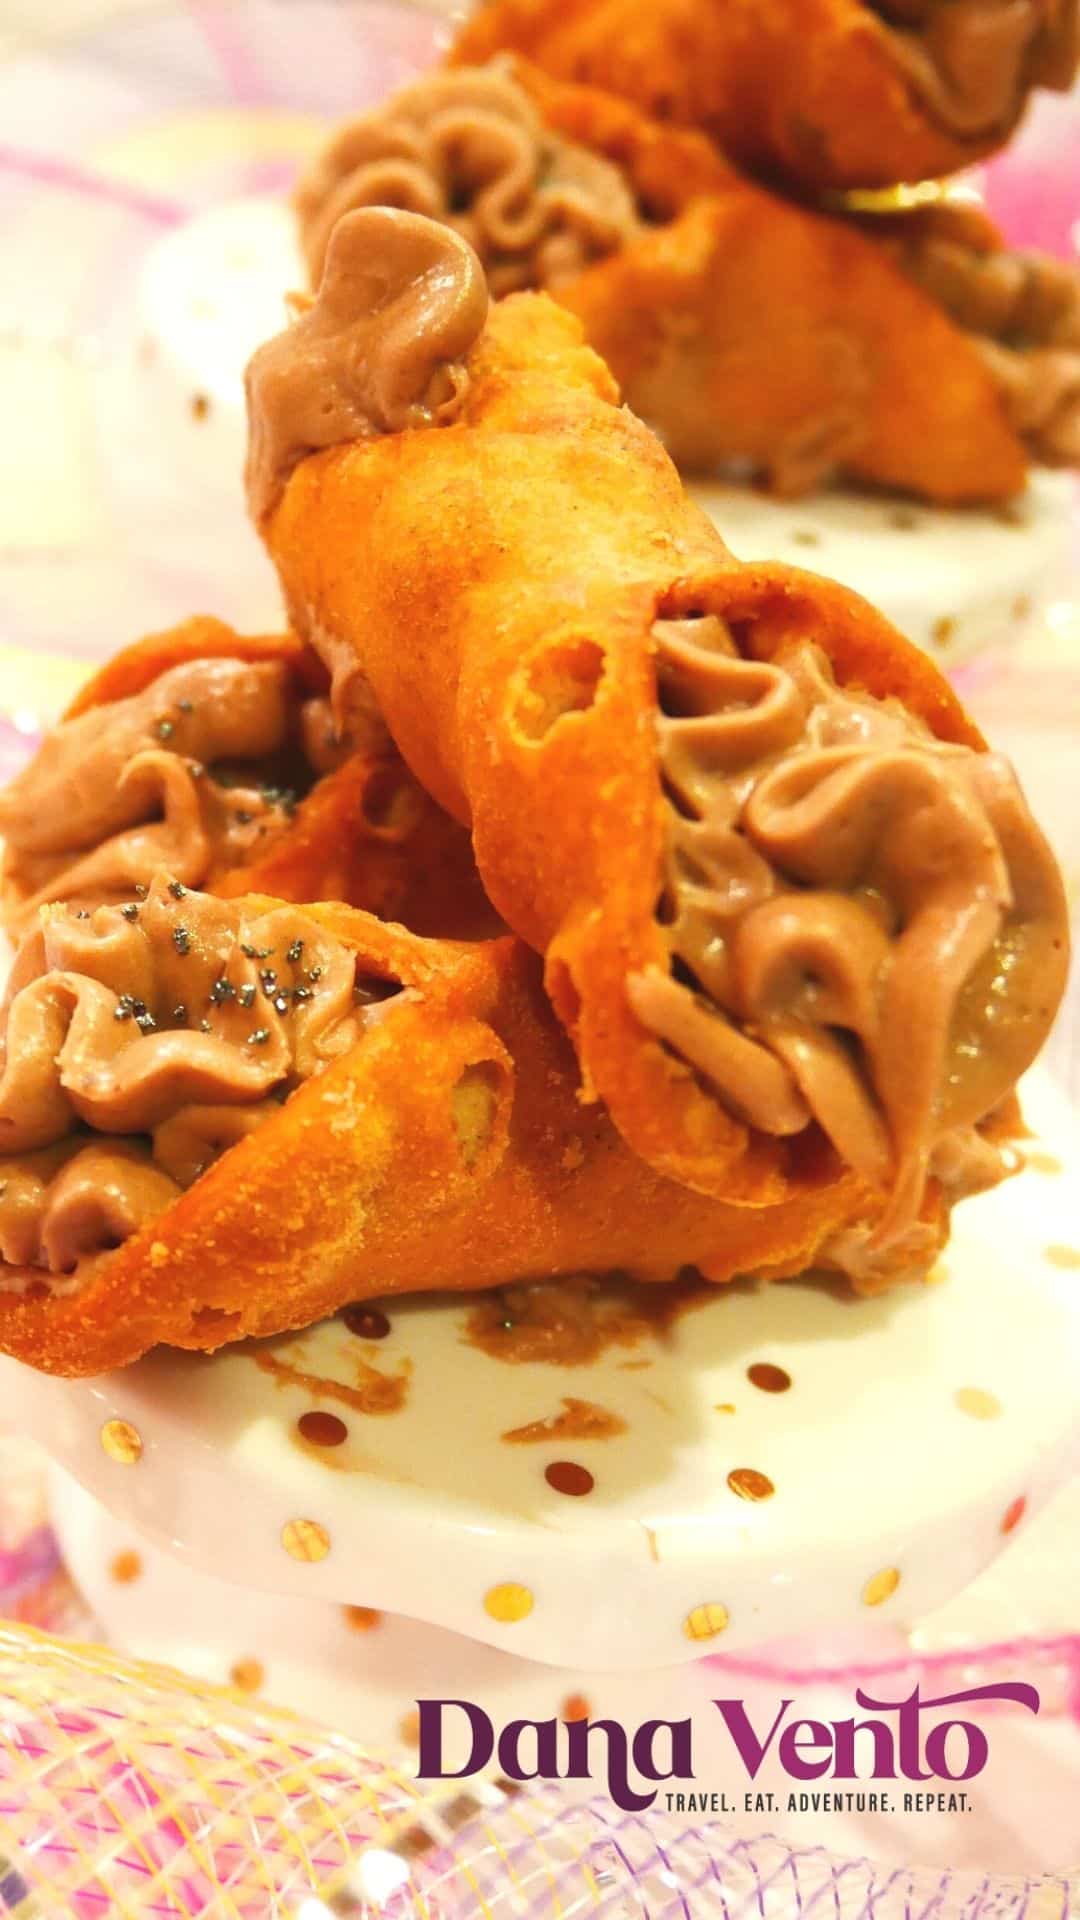 Italian pastry of cannoli filled with a rich chocolate cream